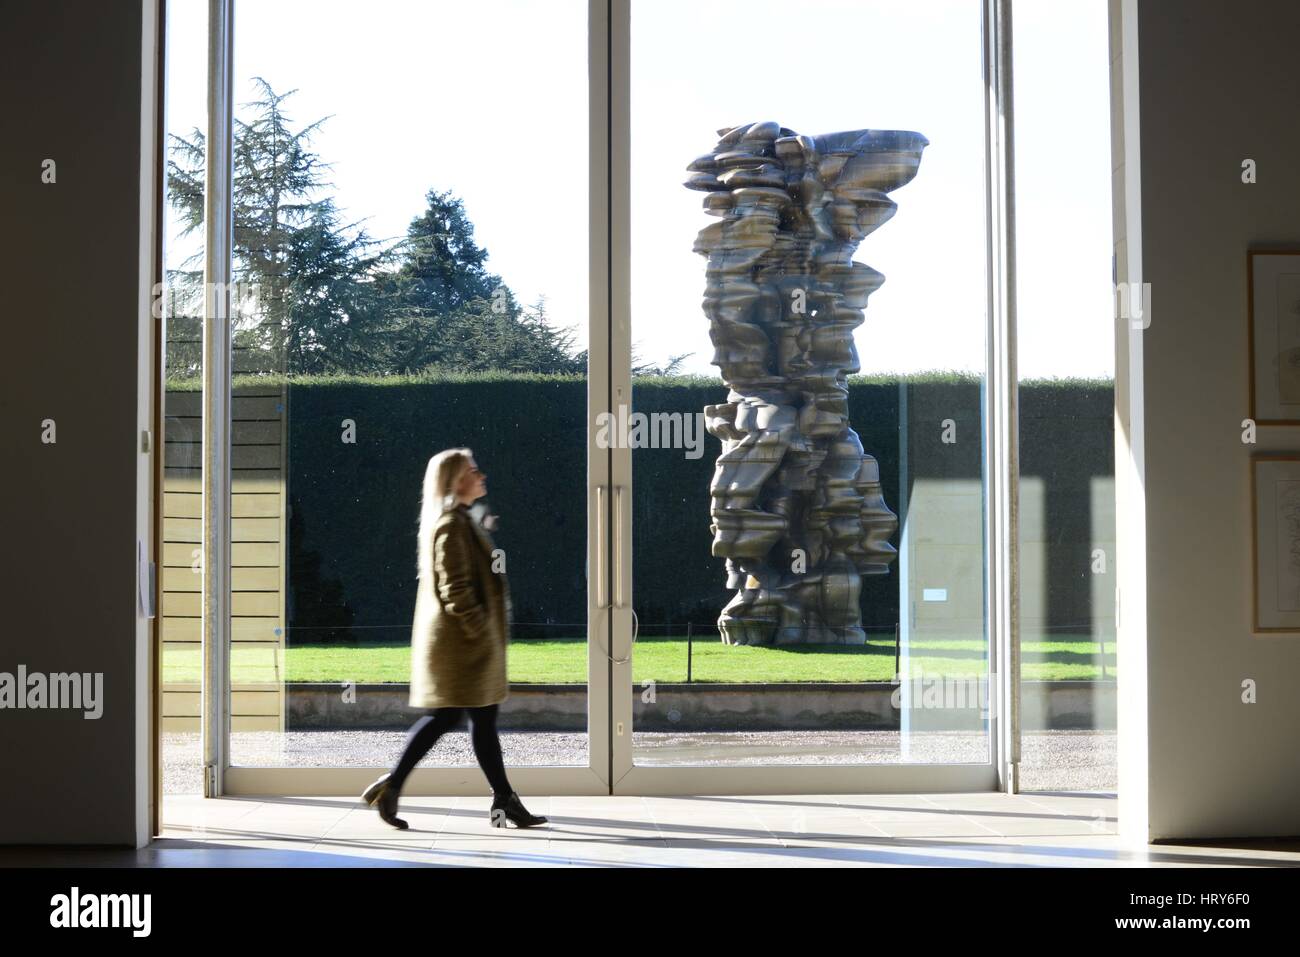 A Yorkshire Sculpture Park visitor walks past a sculpture named 'Mean Average' by sculptor Tony Cragg. The exhibition 'A Rare Category of Objects' by  Stock Photo